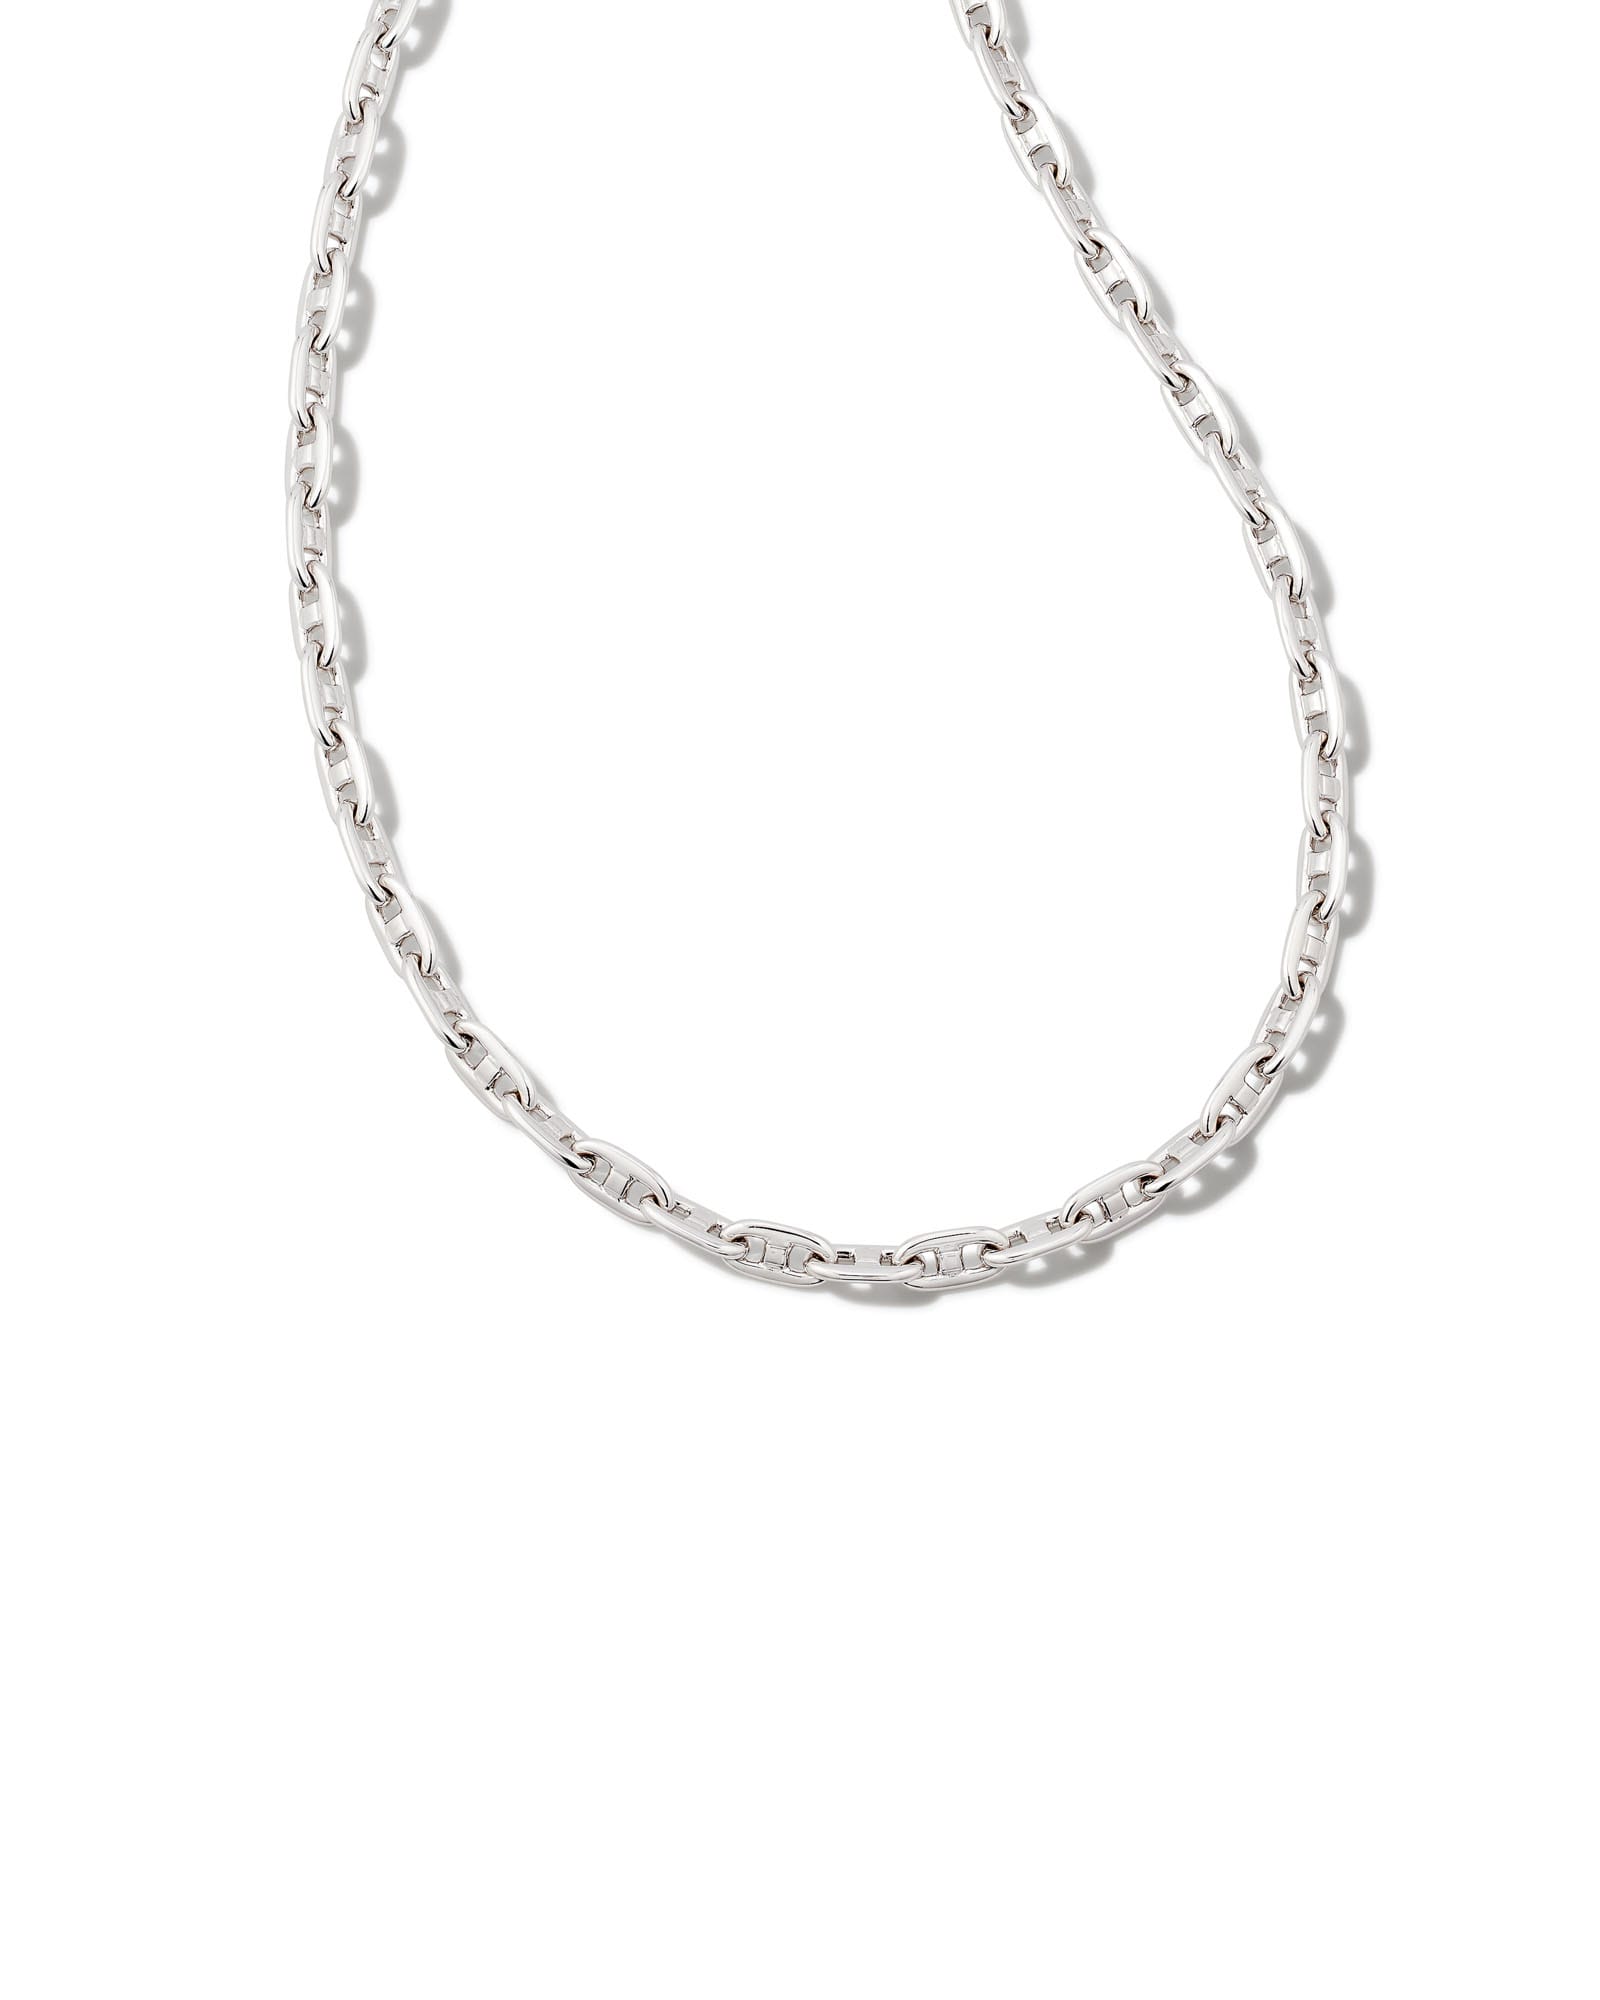 Kendra Scott Bailey Chain Necklace in Silver | Plated Brass/Metal Rhodium